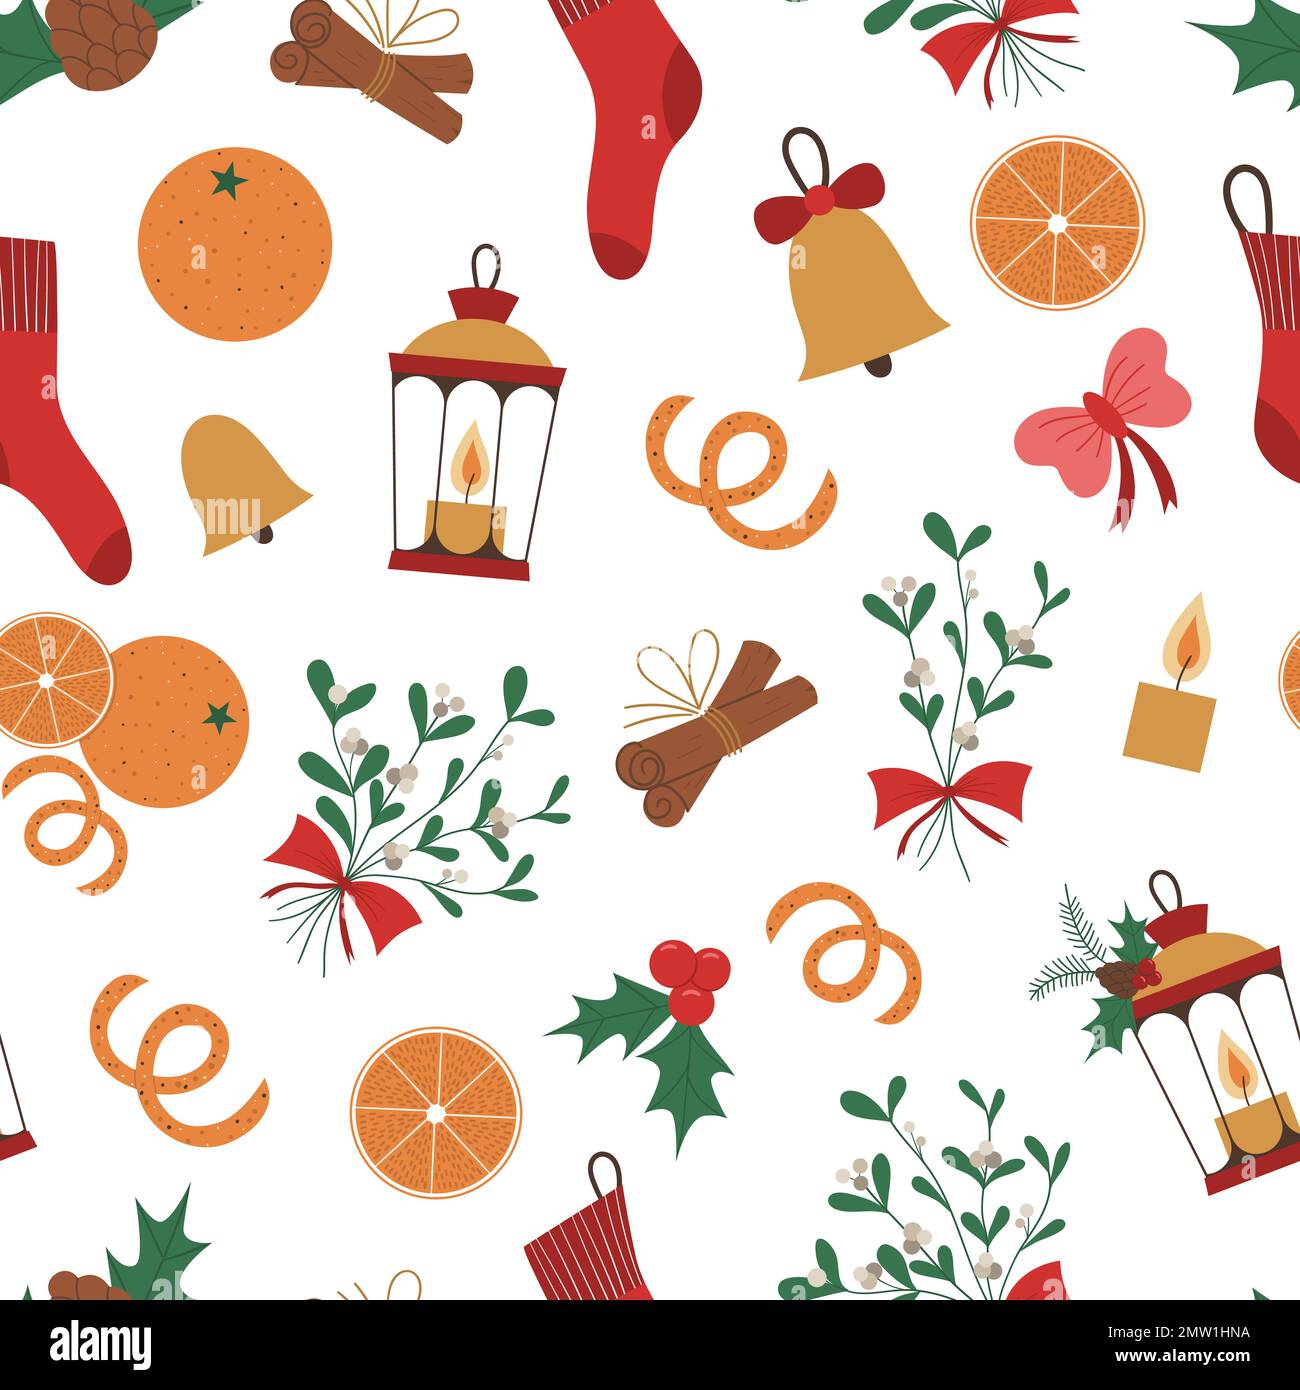 Vector seamless pattern of Christmas elements with lantern, stoking, orange, mistletoe, candle. Cute funny repeat background of new year symbols. Chri Stock Vector